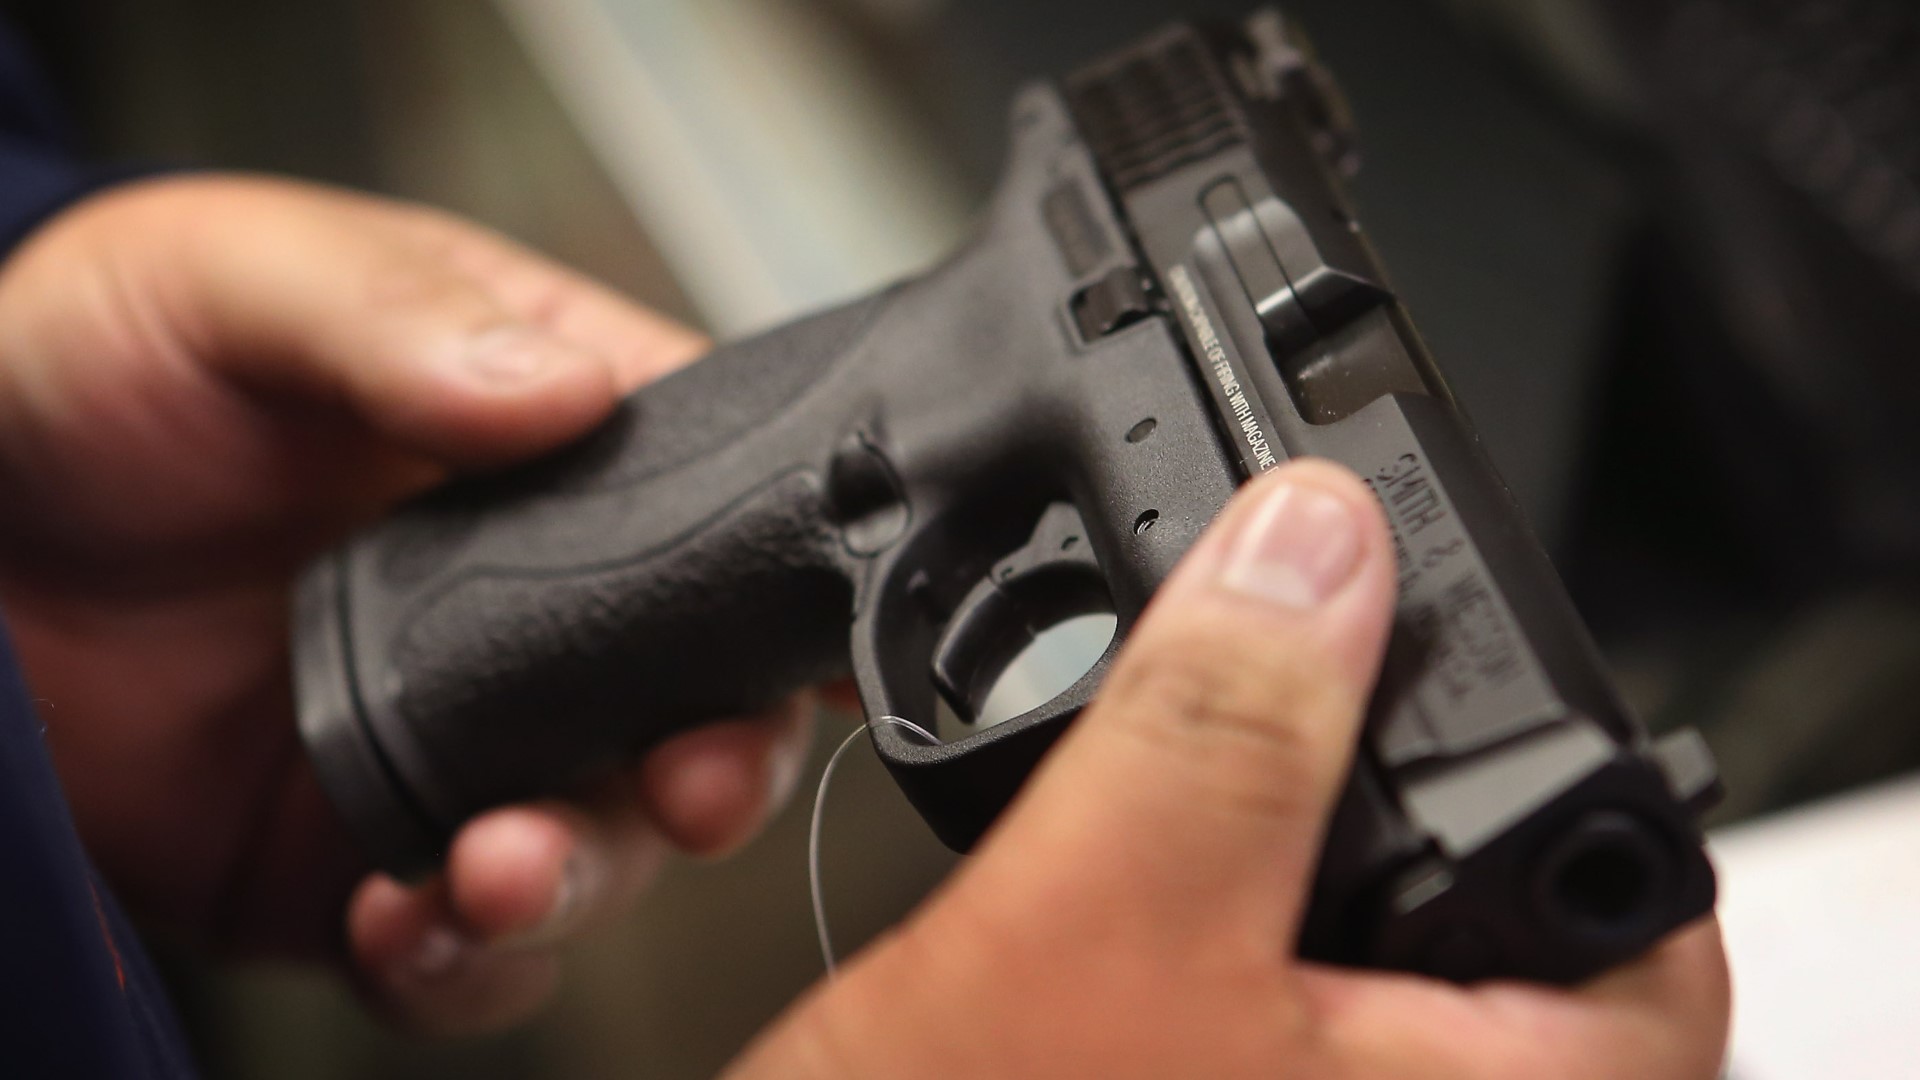 Our Verify team answers an important question regarding the use of a mask while carrying a firearm in Texas.